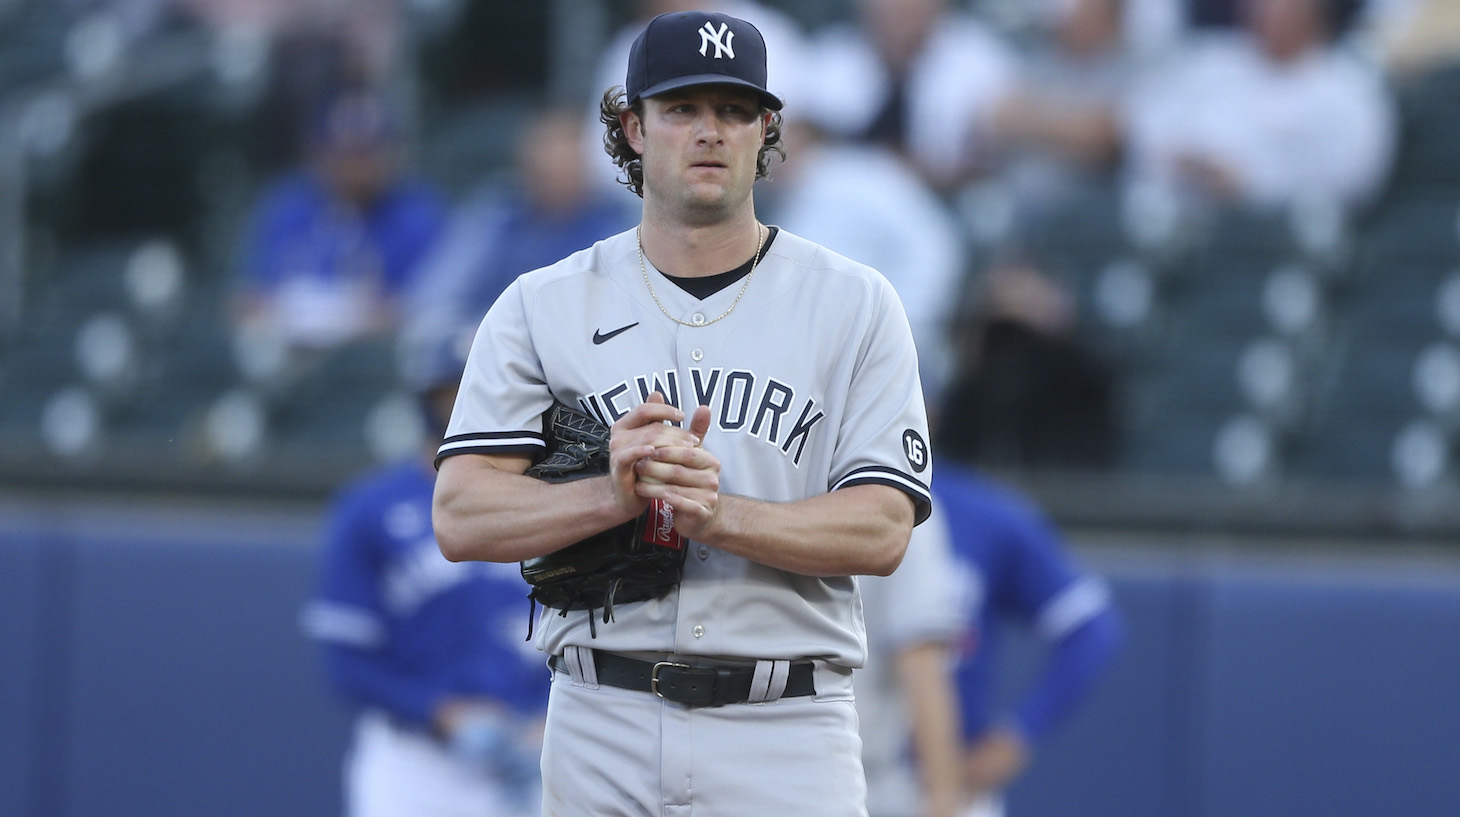 BUFFALO, NEW YORK - JUNE 16: Gerrit Cole #45 of the New York Yankees rubs the ball between pitches during the second inning against the Toronto Blue Jays at Sahlen Field on June 16, 2021 in Buffalo, New York. (Photo by Joshua Bessex/Getty Images)